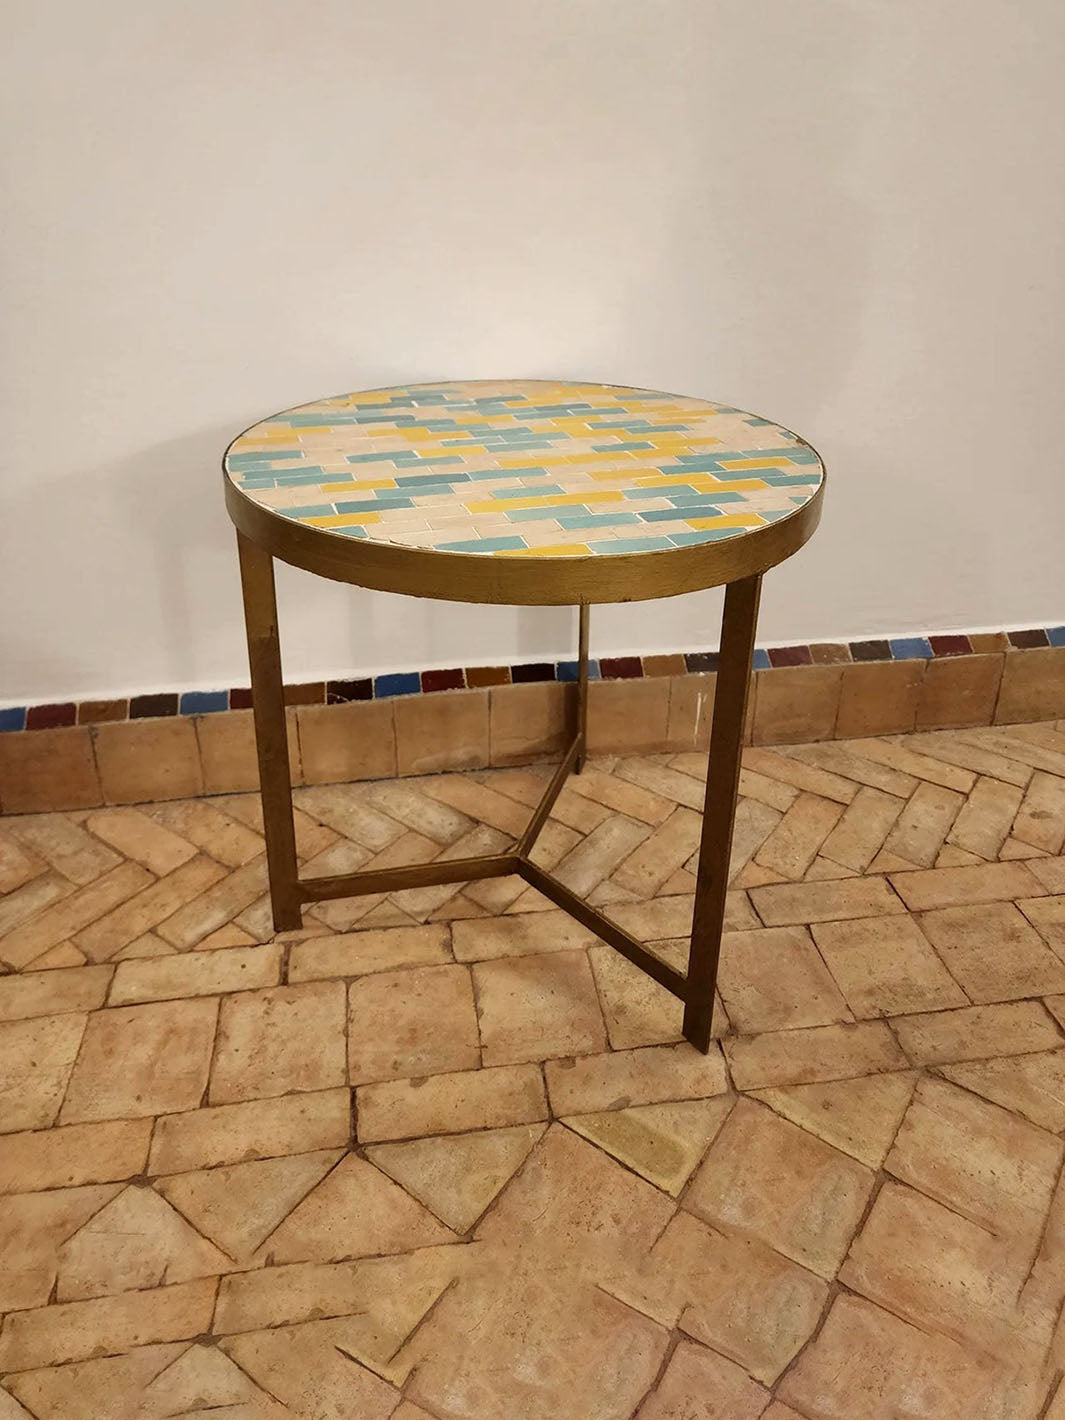 Handcrafted Berber Rounded Coffee Table w/ Zellige Tile